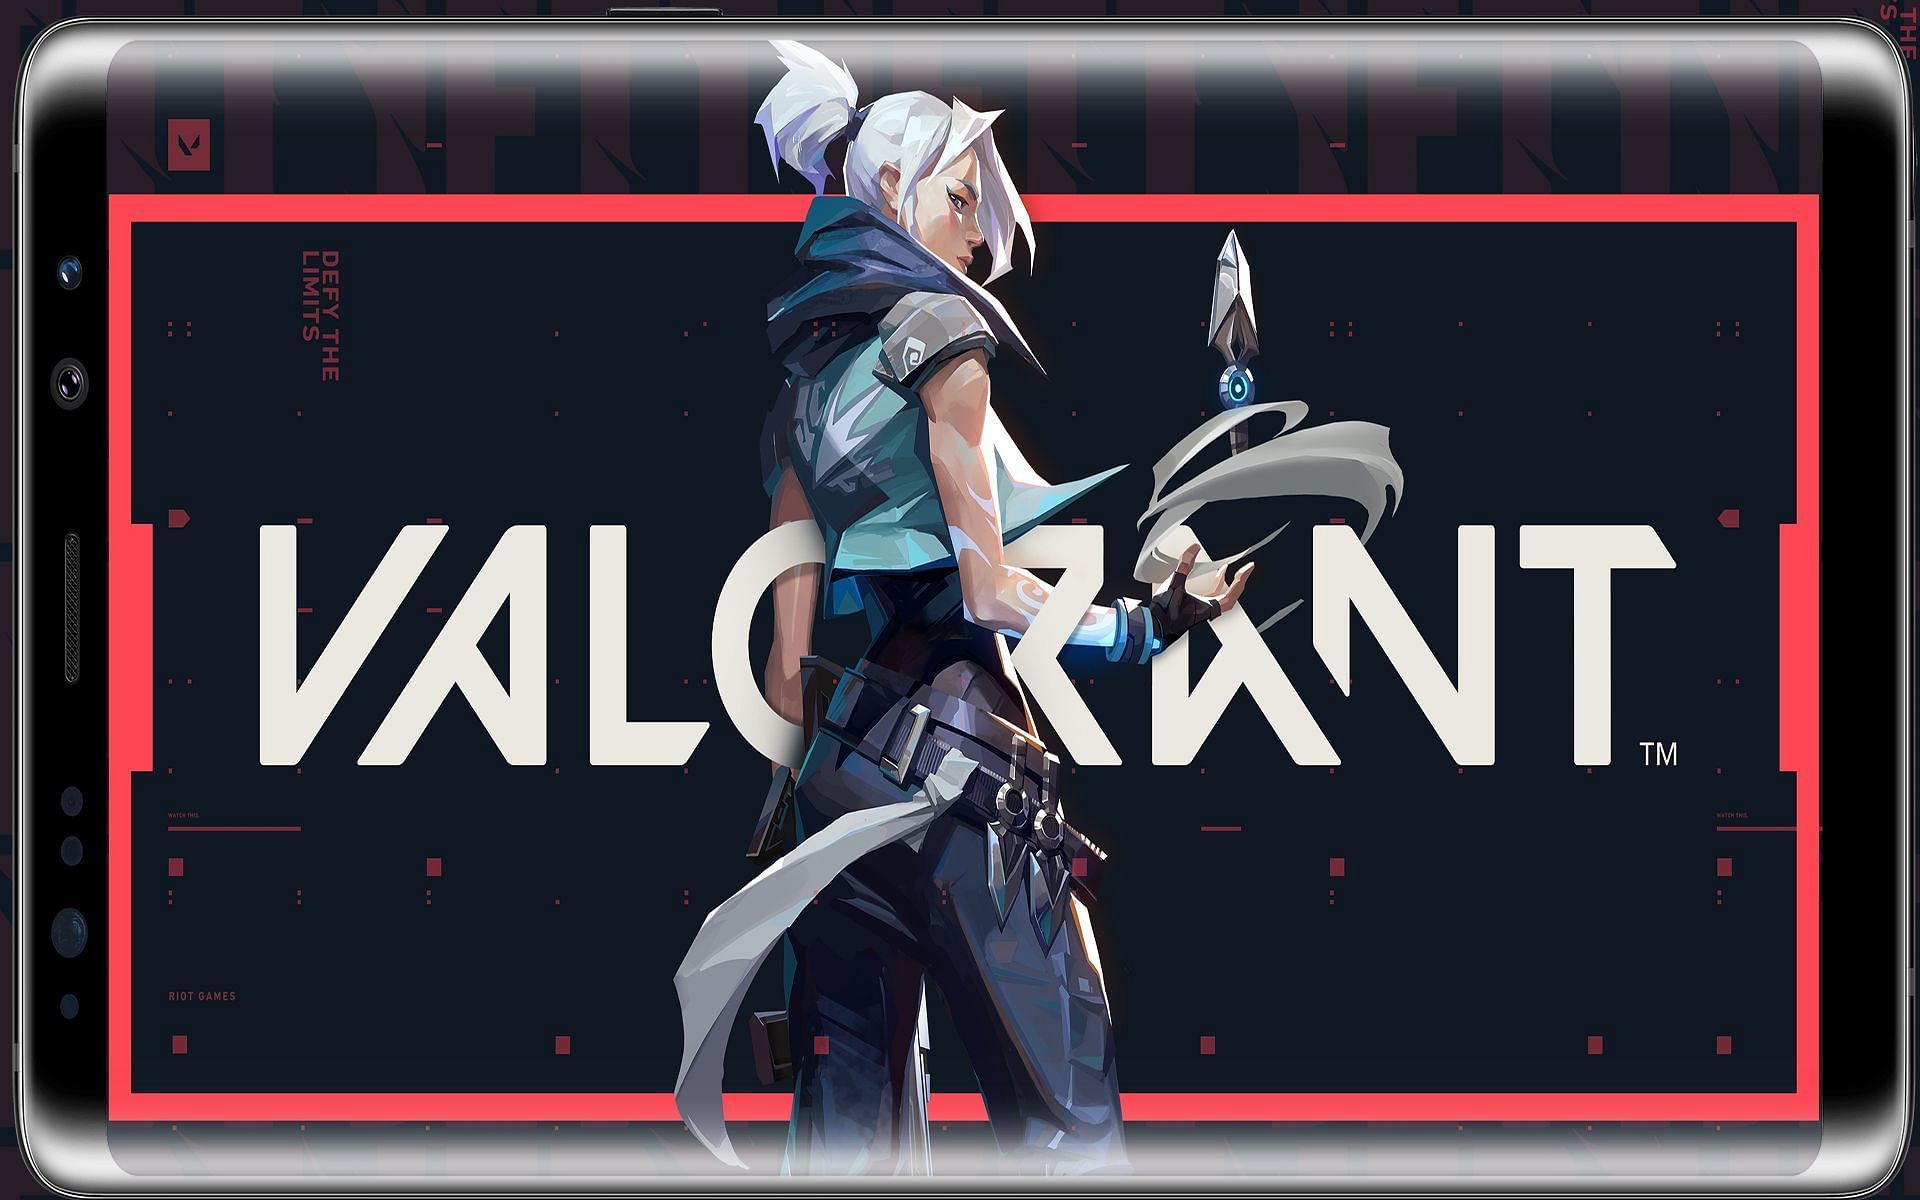 VALORANT: Riot Games' competitive 5v5 character-based tactical shooter